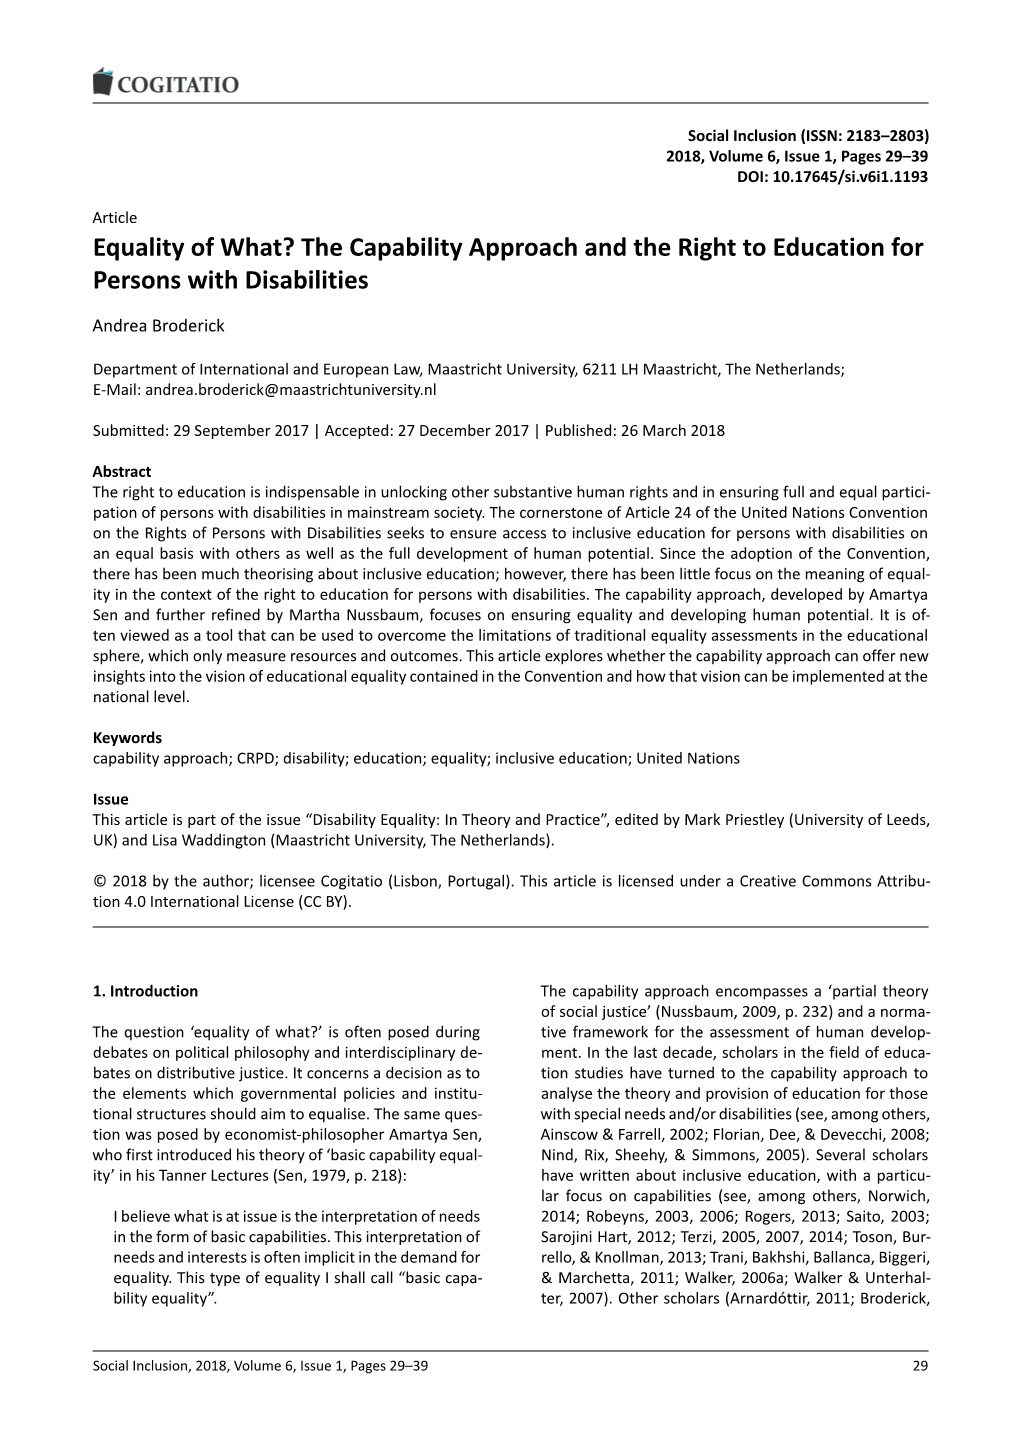 The Capability Approach and the Right to Education for Persons with Disabilities